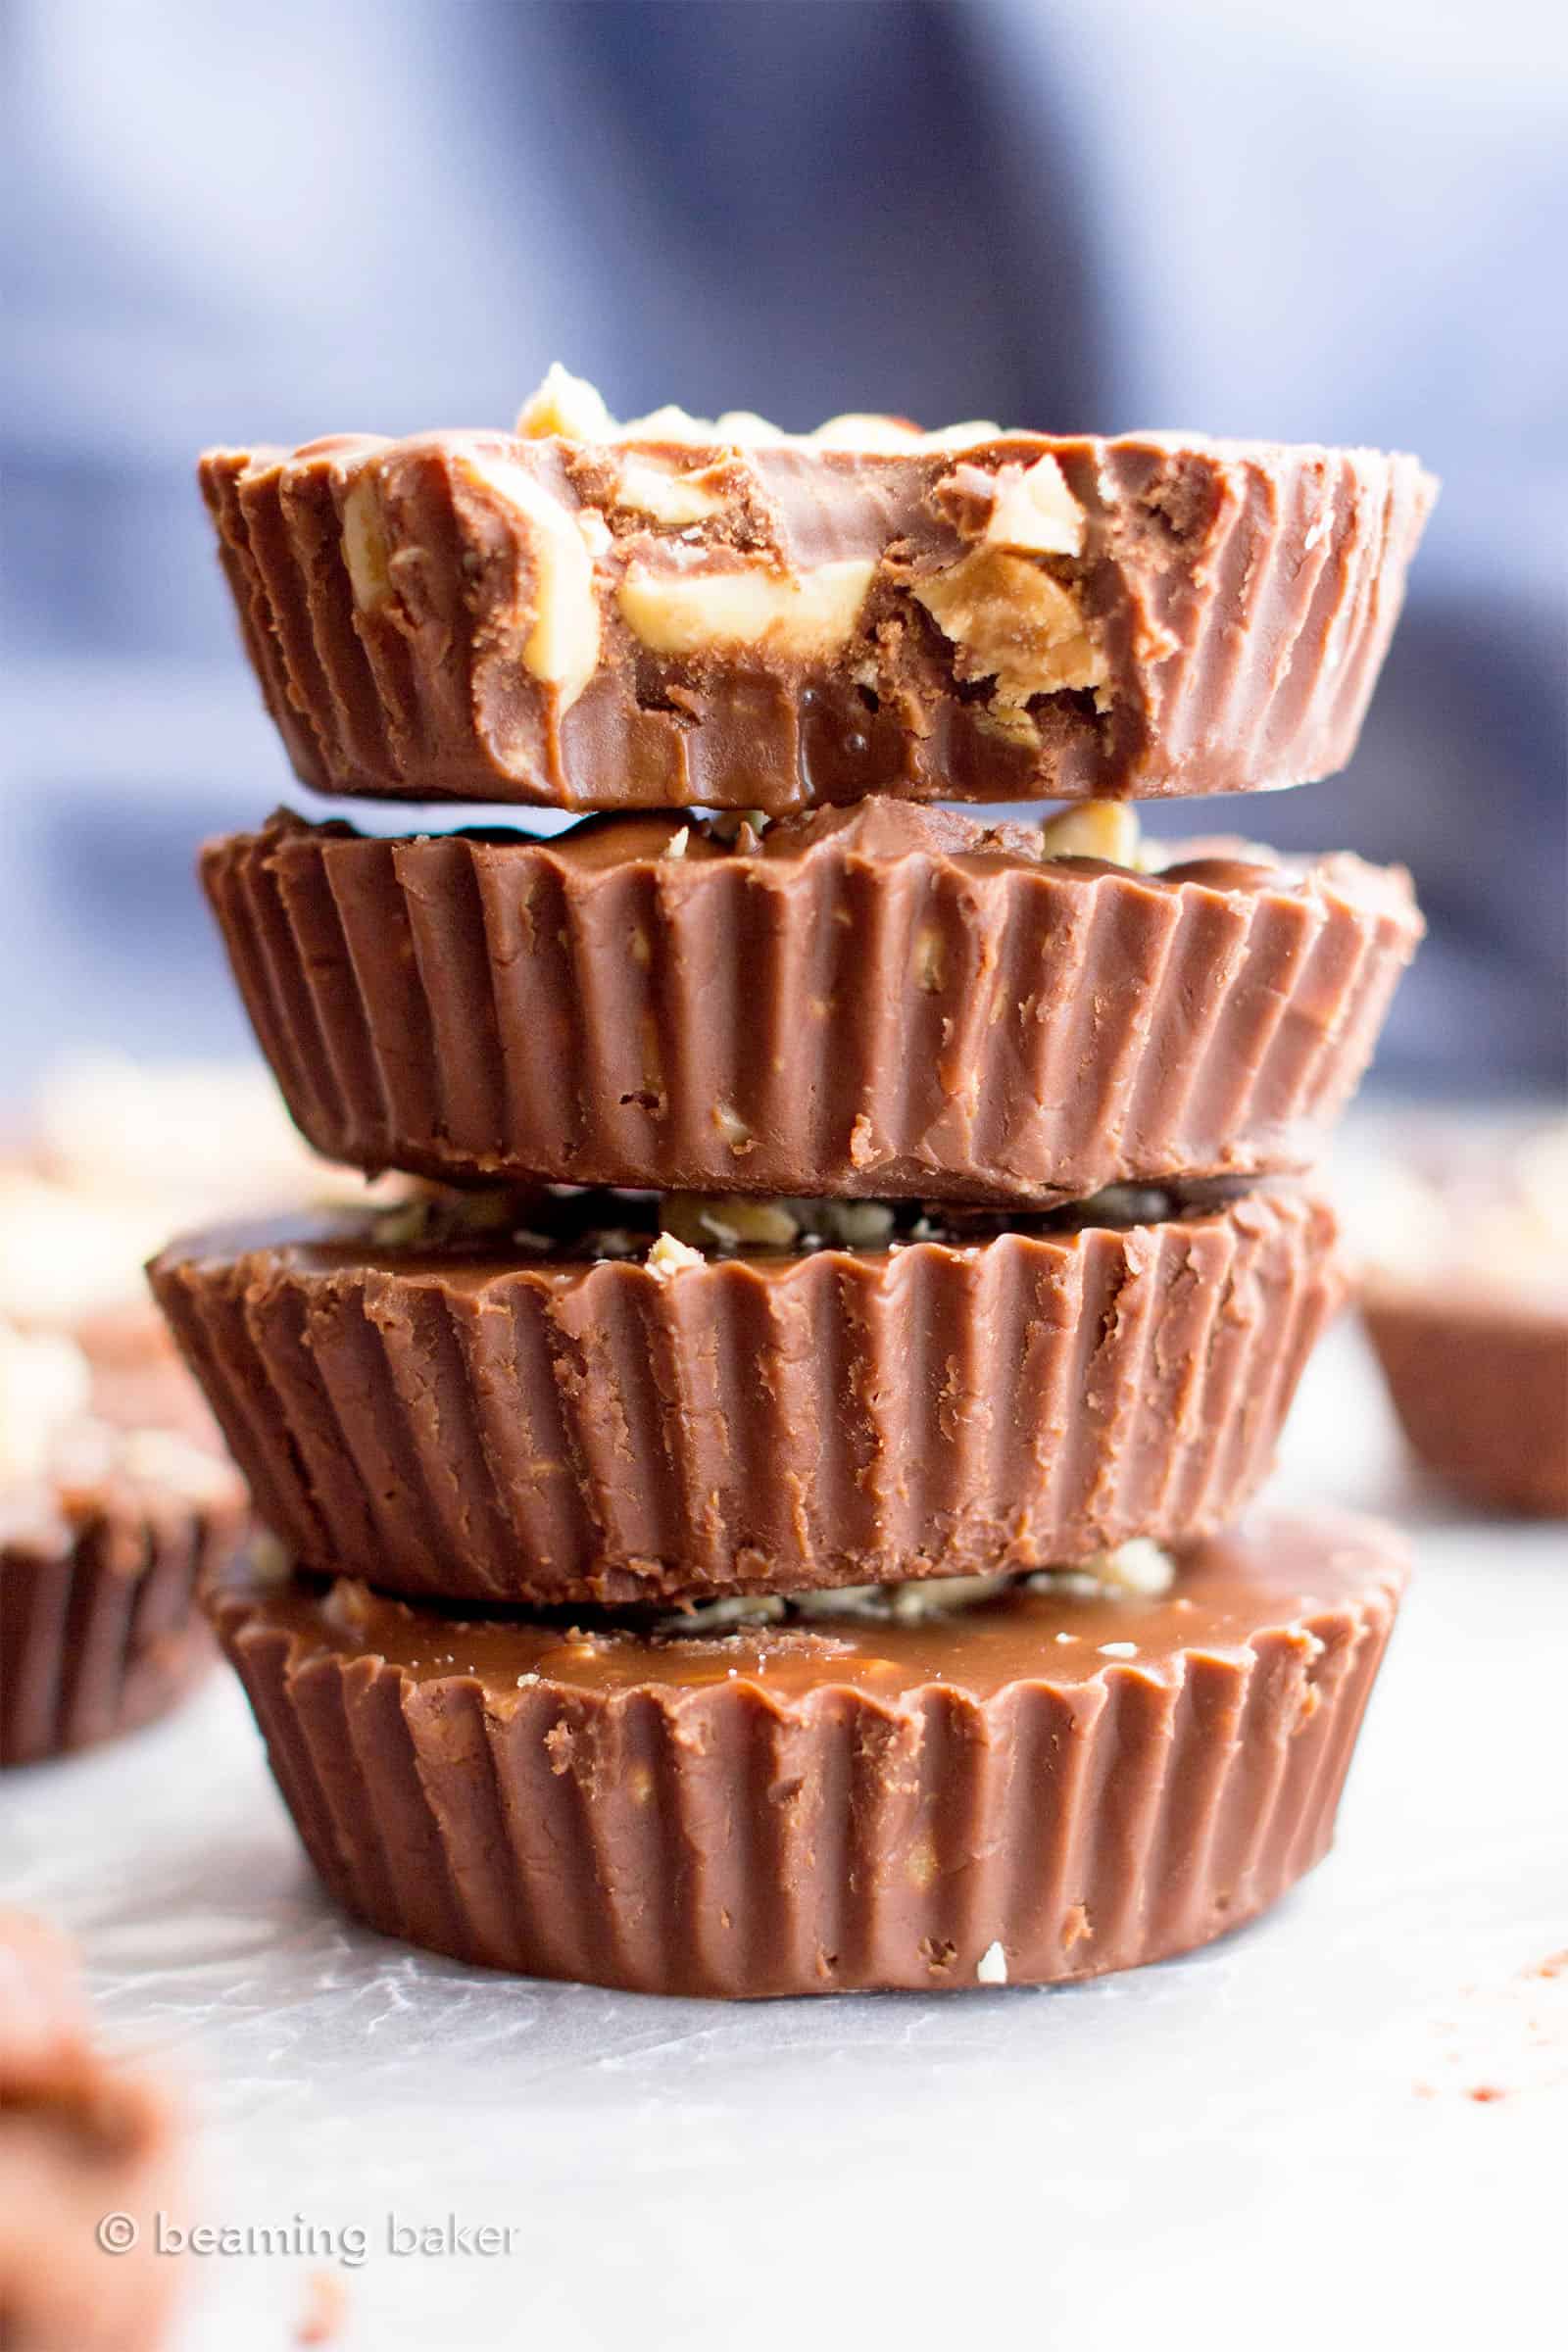 Chocolate Peanut Butter Fudge Cups: only 3 ingredients for super easy chocolate peanut butter fudge cups that are decadent, creamy and delicious! #Chocolate #PeanutButter #Fudge | Recipe at BeamingBaker.com